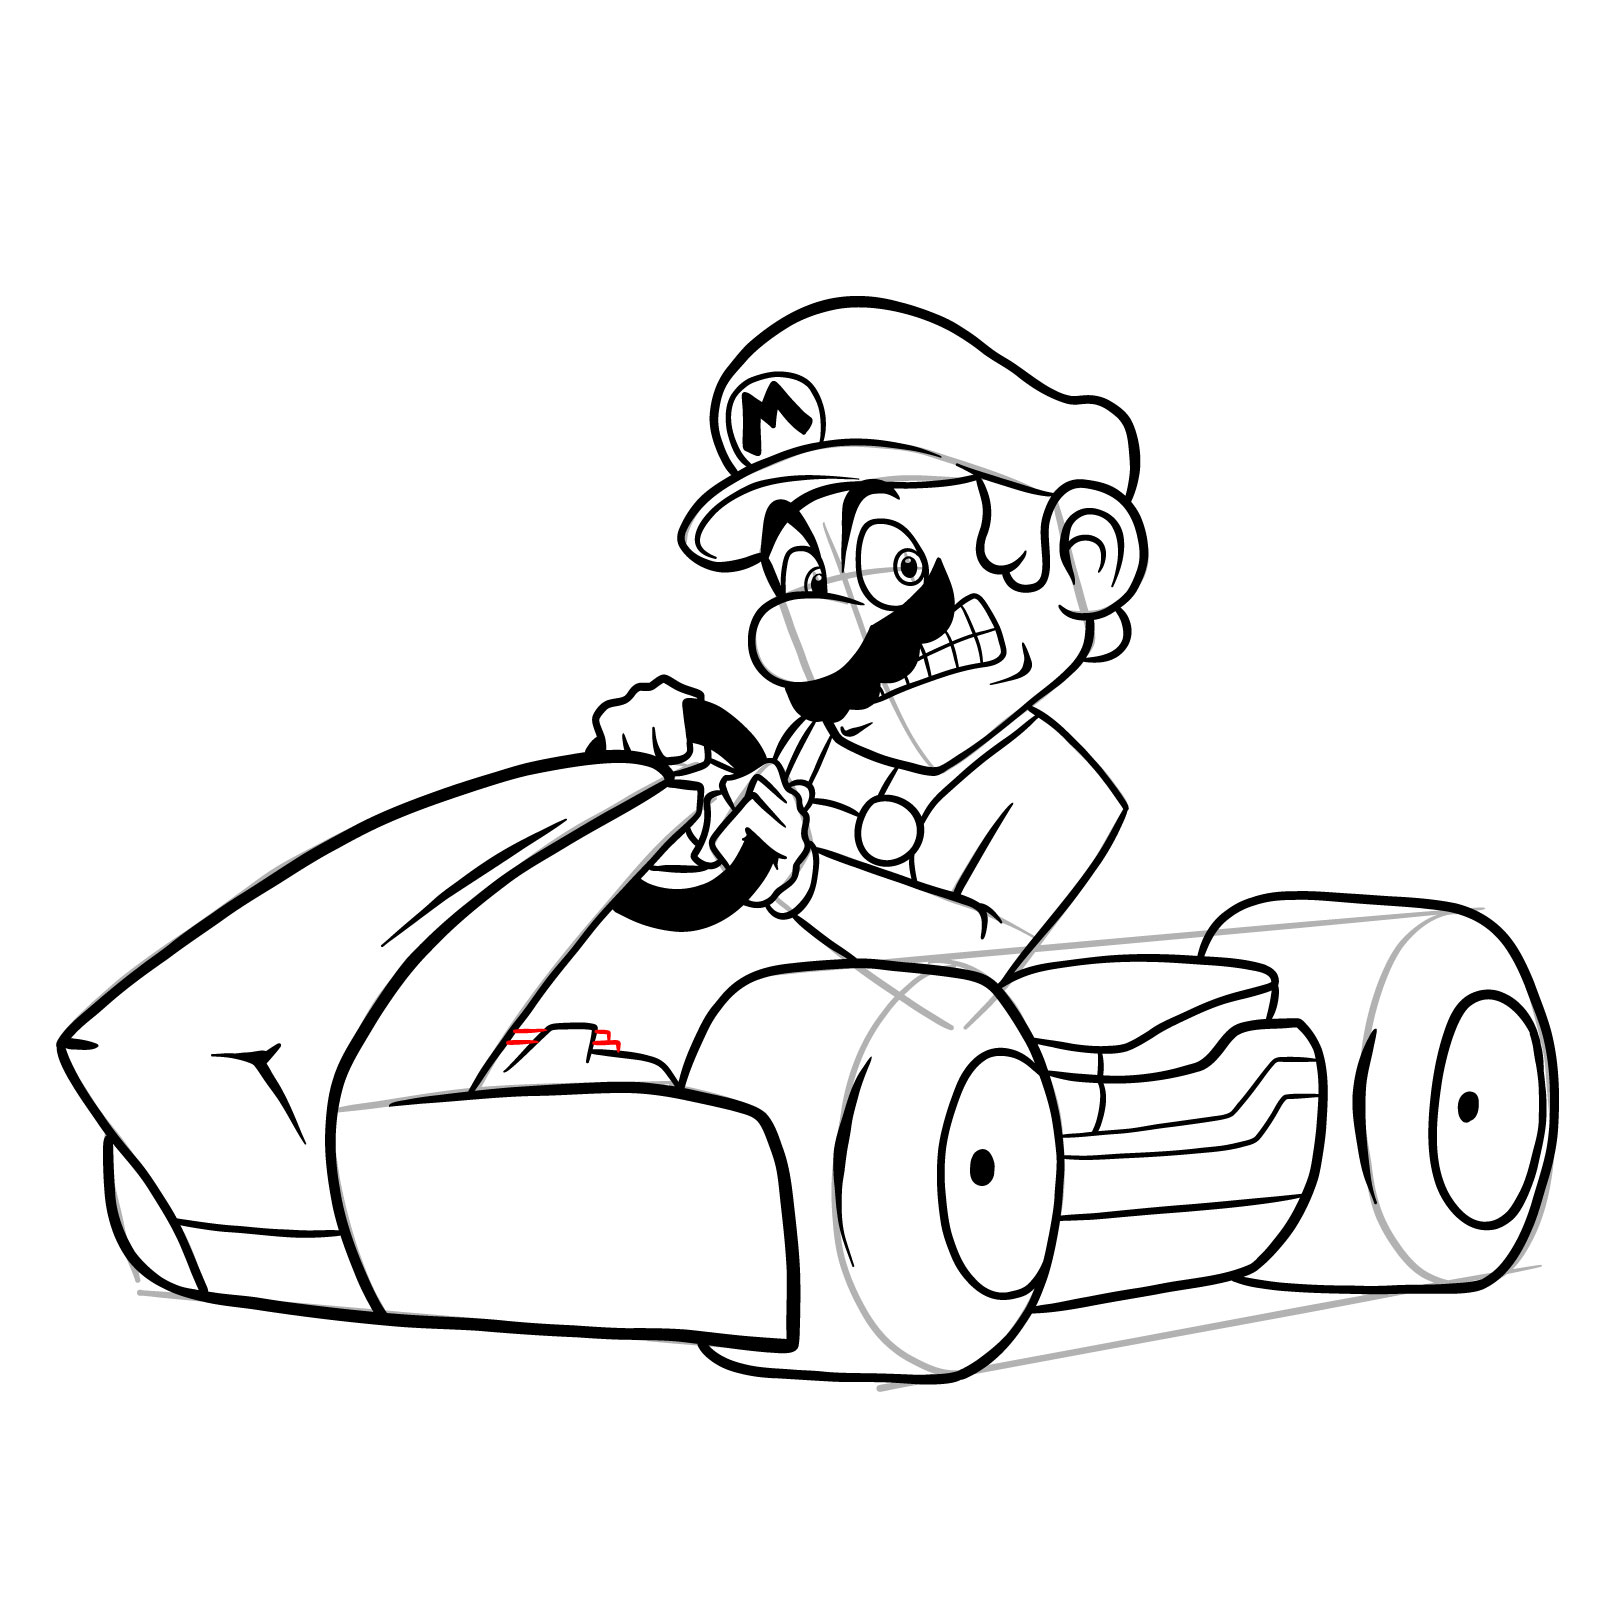 How to draw Race Traitors Mario - step 38